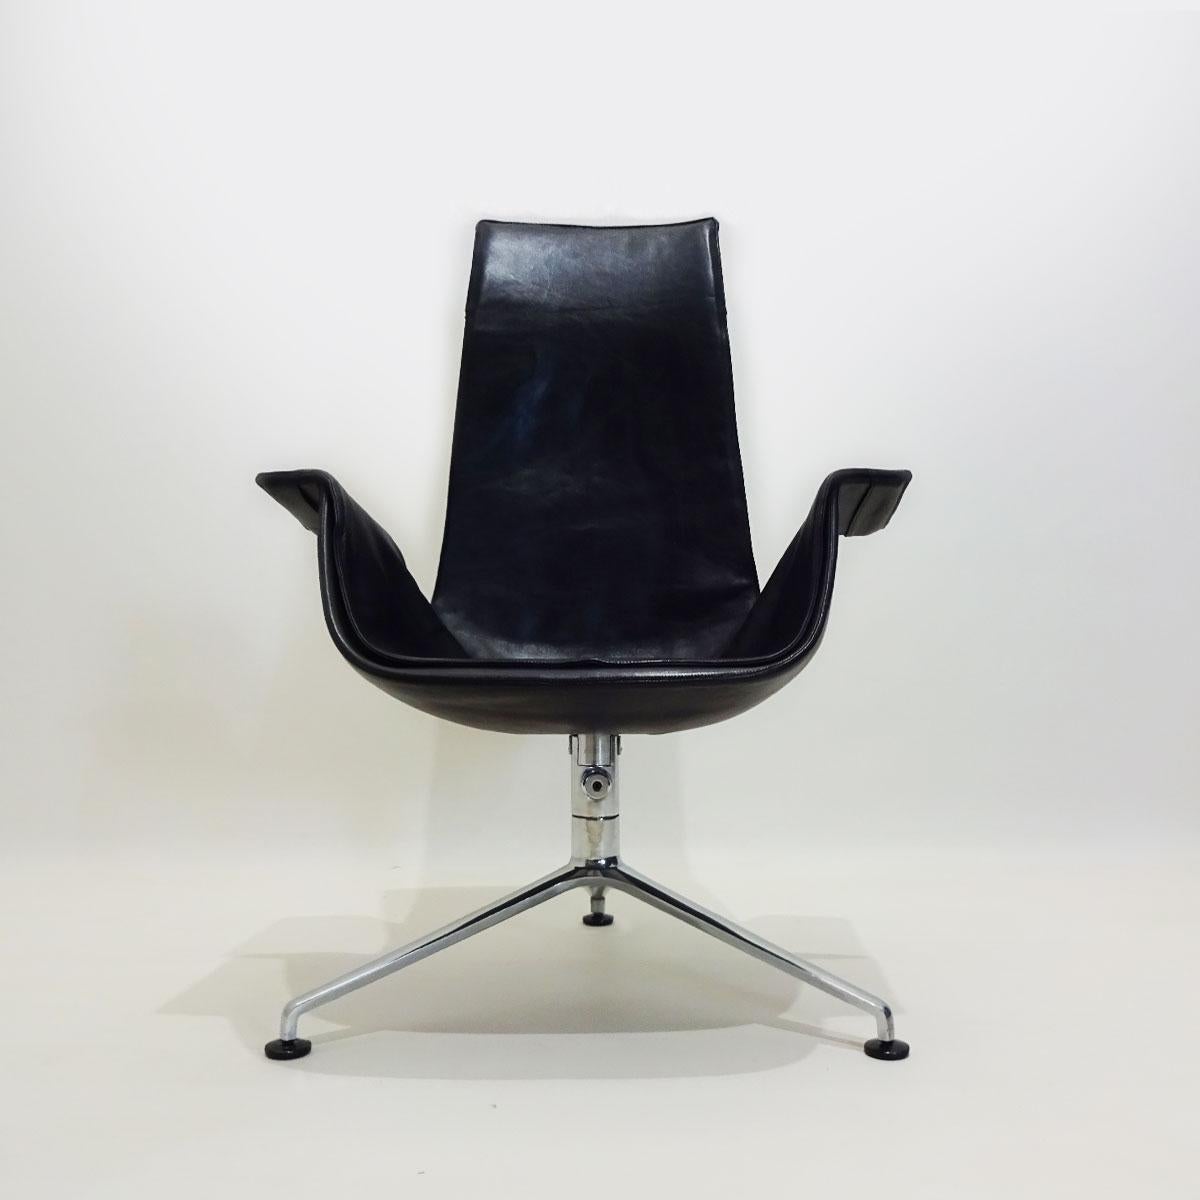 A very rare reclining black leather, aluminium and chrome Tulip chair by Preben Fabricius and Jørgen Kastholm for Kill International.

Originally designed by powerhouse 1960s design team Preben Fabricius and Jørgen Kastholm in 1964, their Tulip